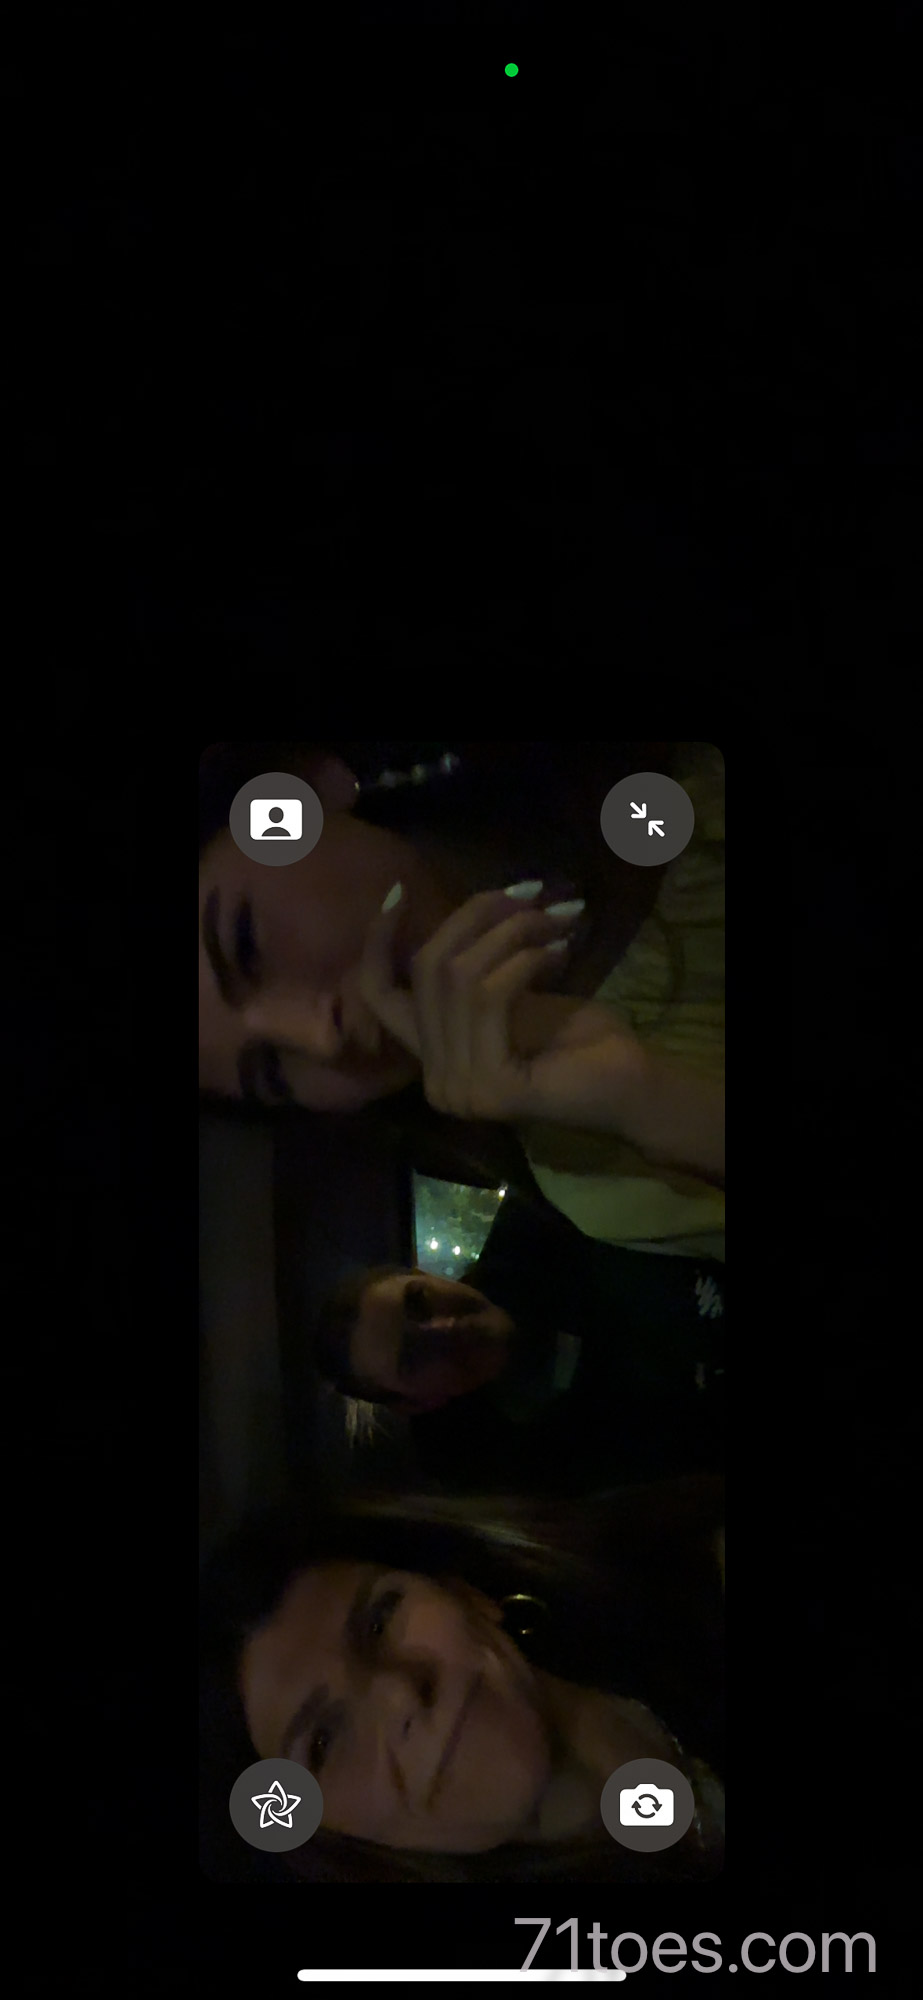 Screenshot of Shawni, Grace and Claire reading on FaceTime with Lucy, connecting while far apart.